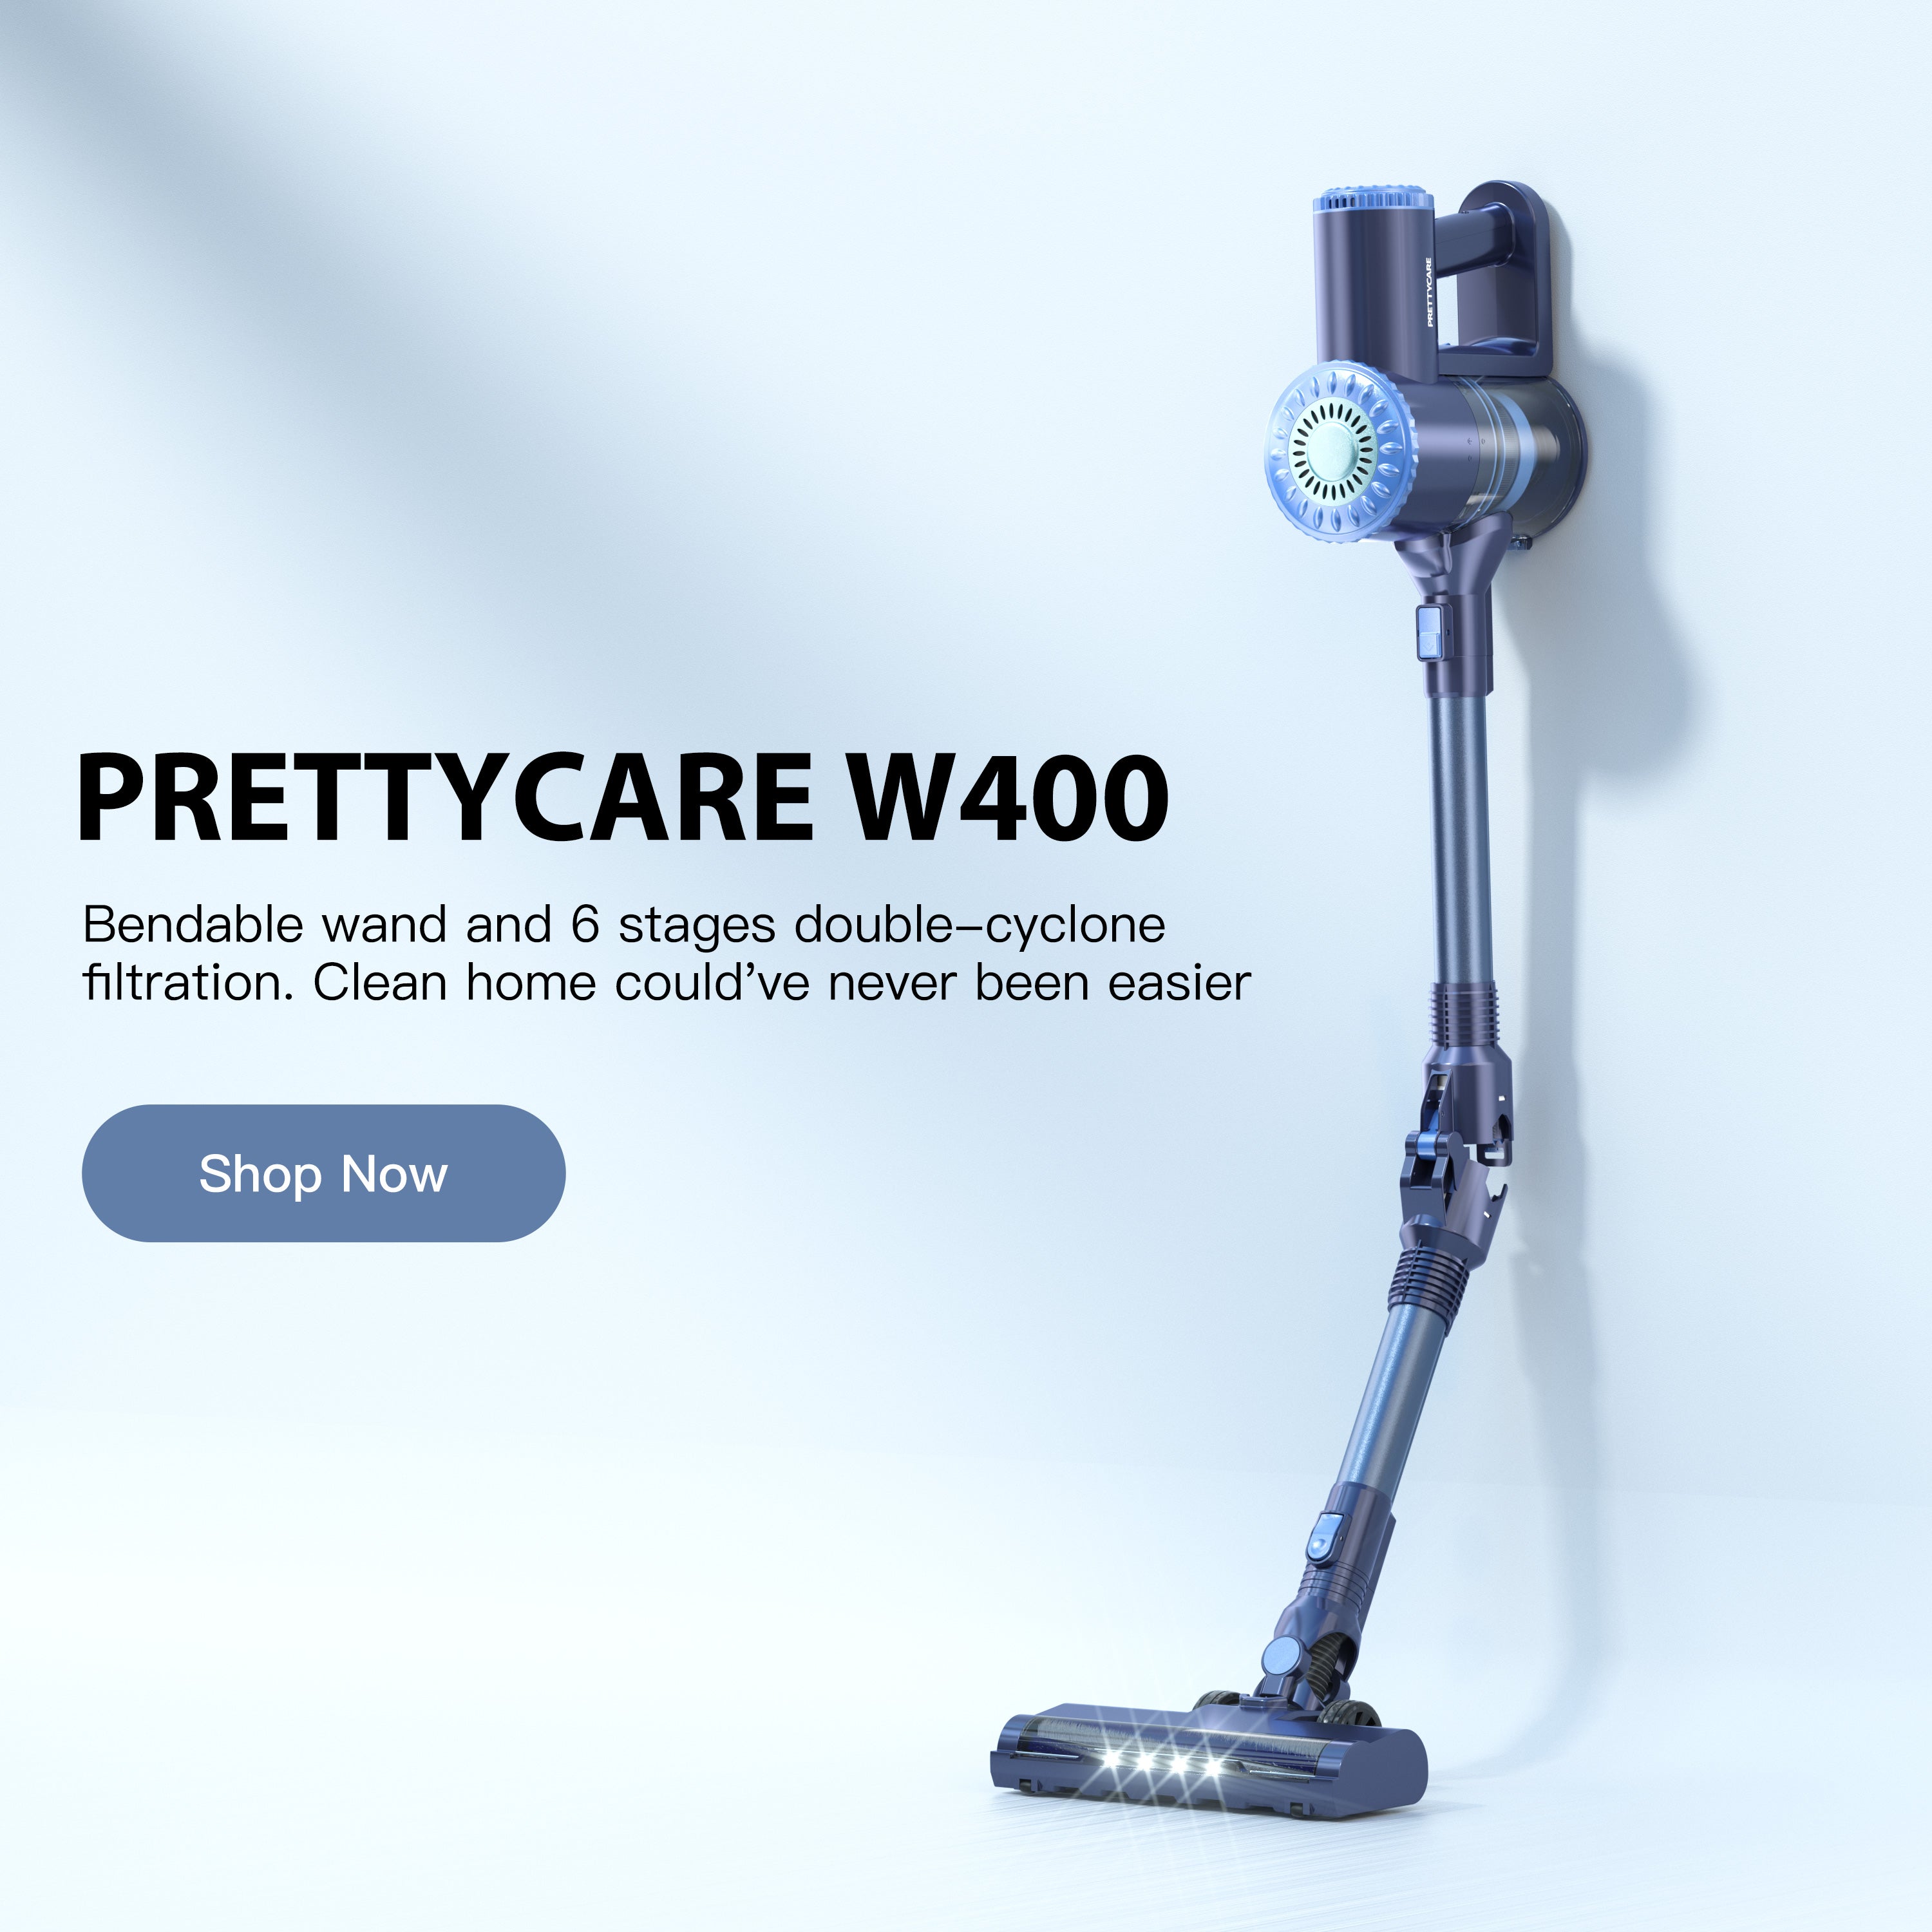 PRETTYCARE W400 Powerful Suction, Foldable Tube Upgrade Brushless Motor  Cordless Vacuum Cleaner Perfect for Hard Floor, Carpet, Pet Hair